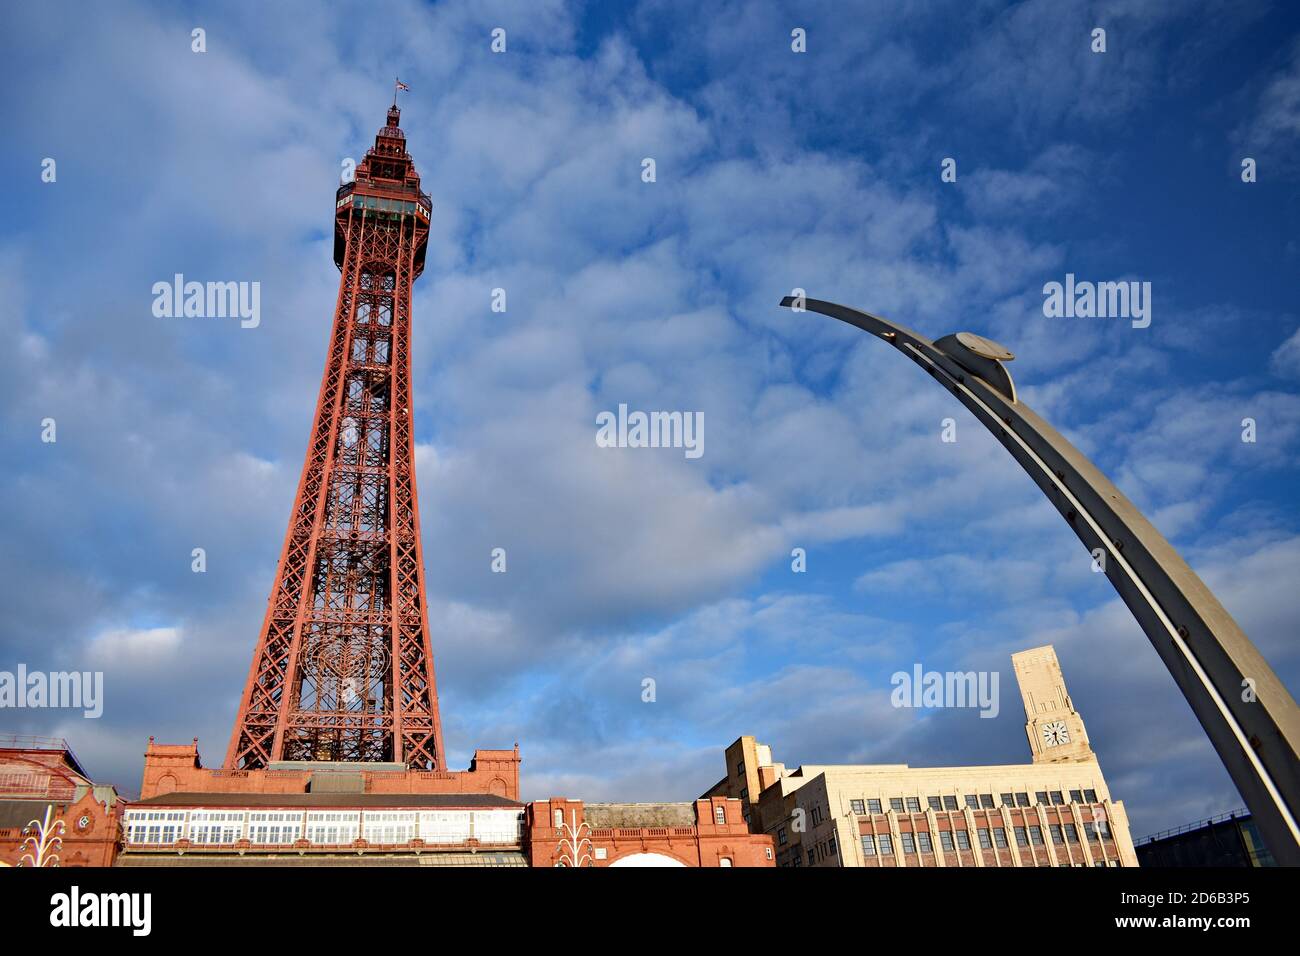 Looking upwards at the Blackpool Tower in Lancashire, North West England.  The red colour of the tower stands out against the blue sky. Stock Photo